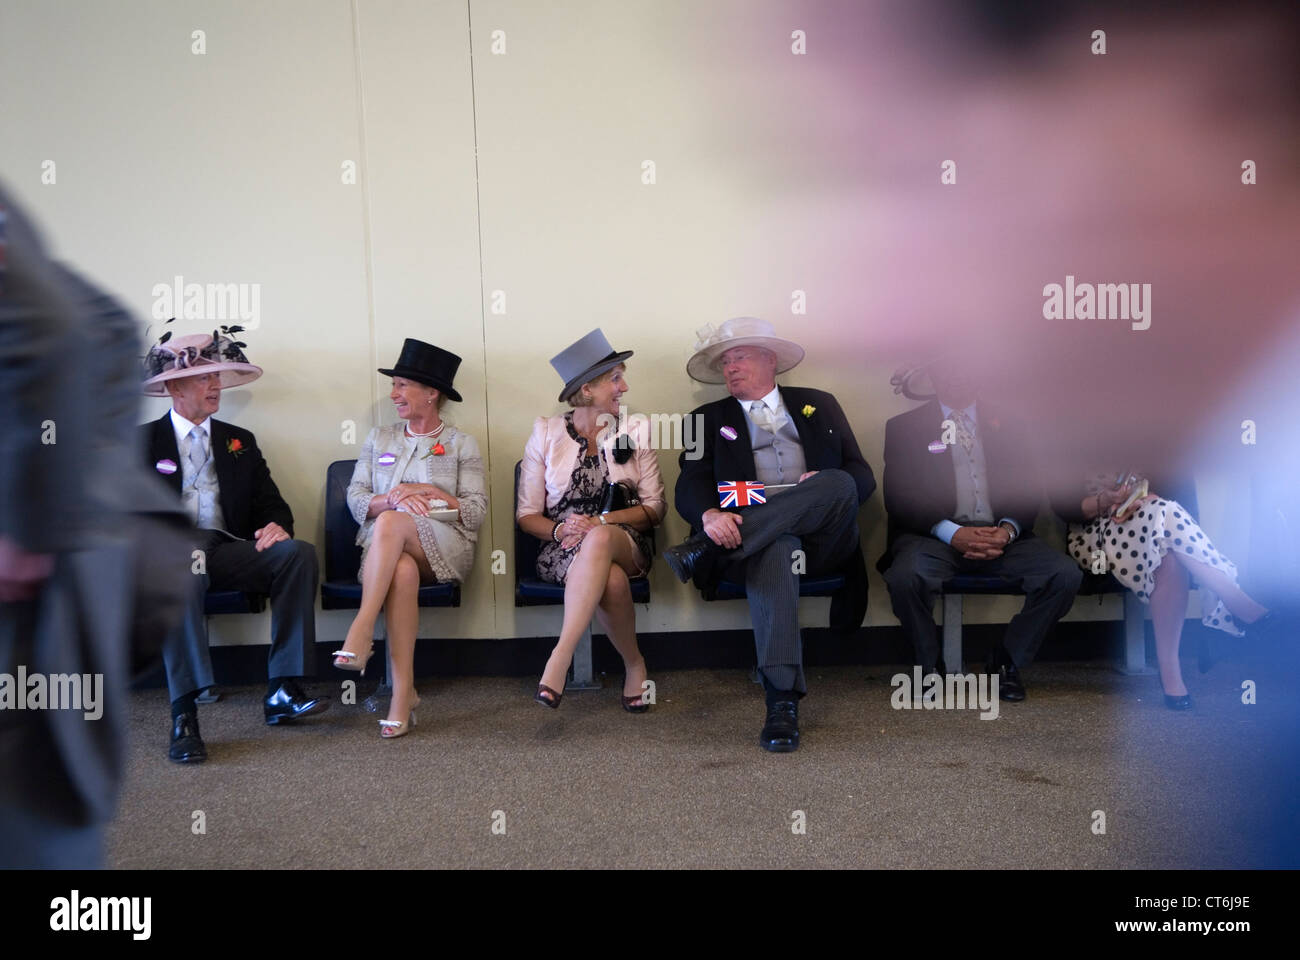 Elderly  group friends Royal Ascot horse racing Berkshire.Seniors having fun after a jolly good day at the races. 2012 2010s UK HOMER SYKES Stock Photo